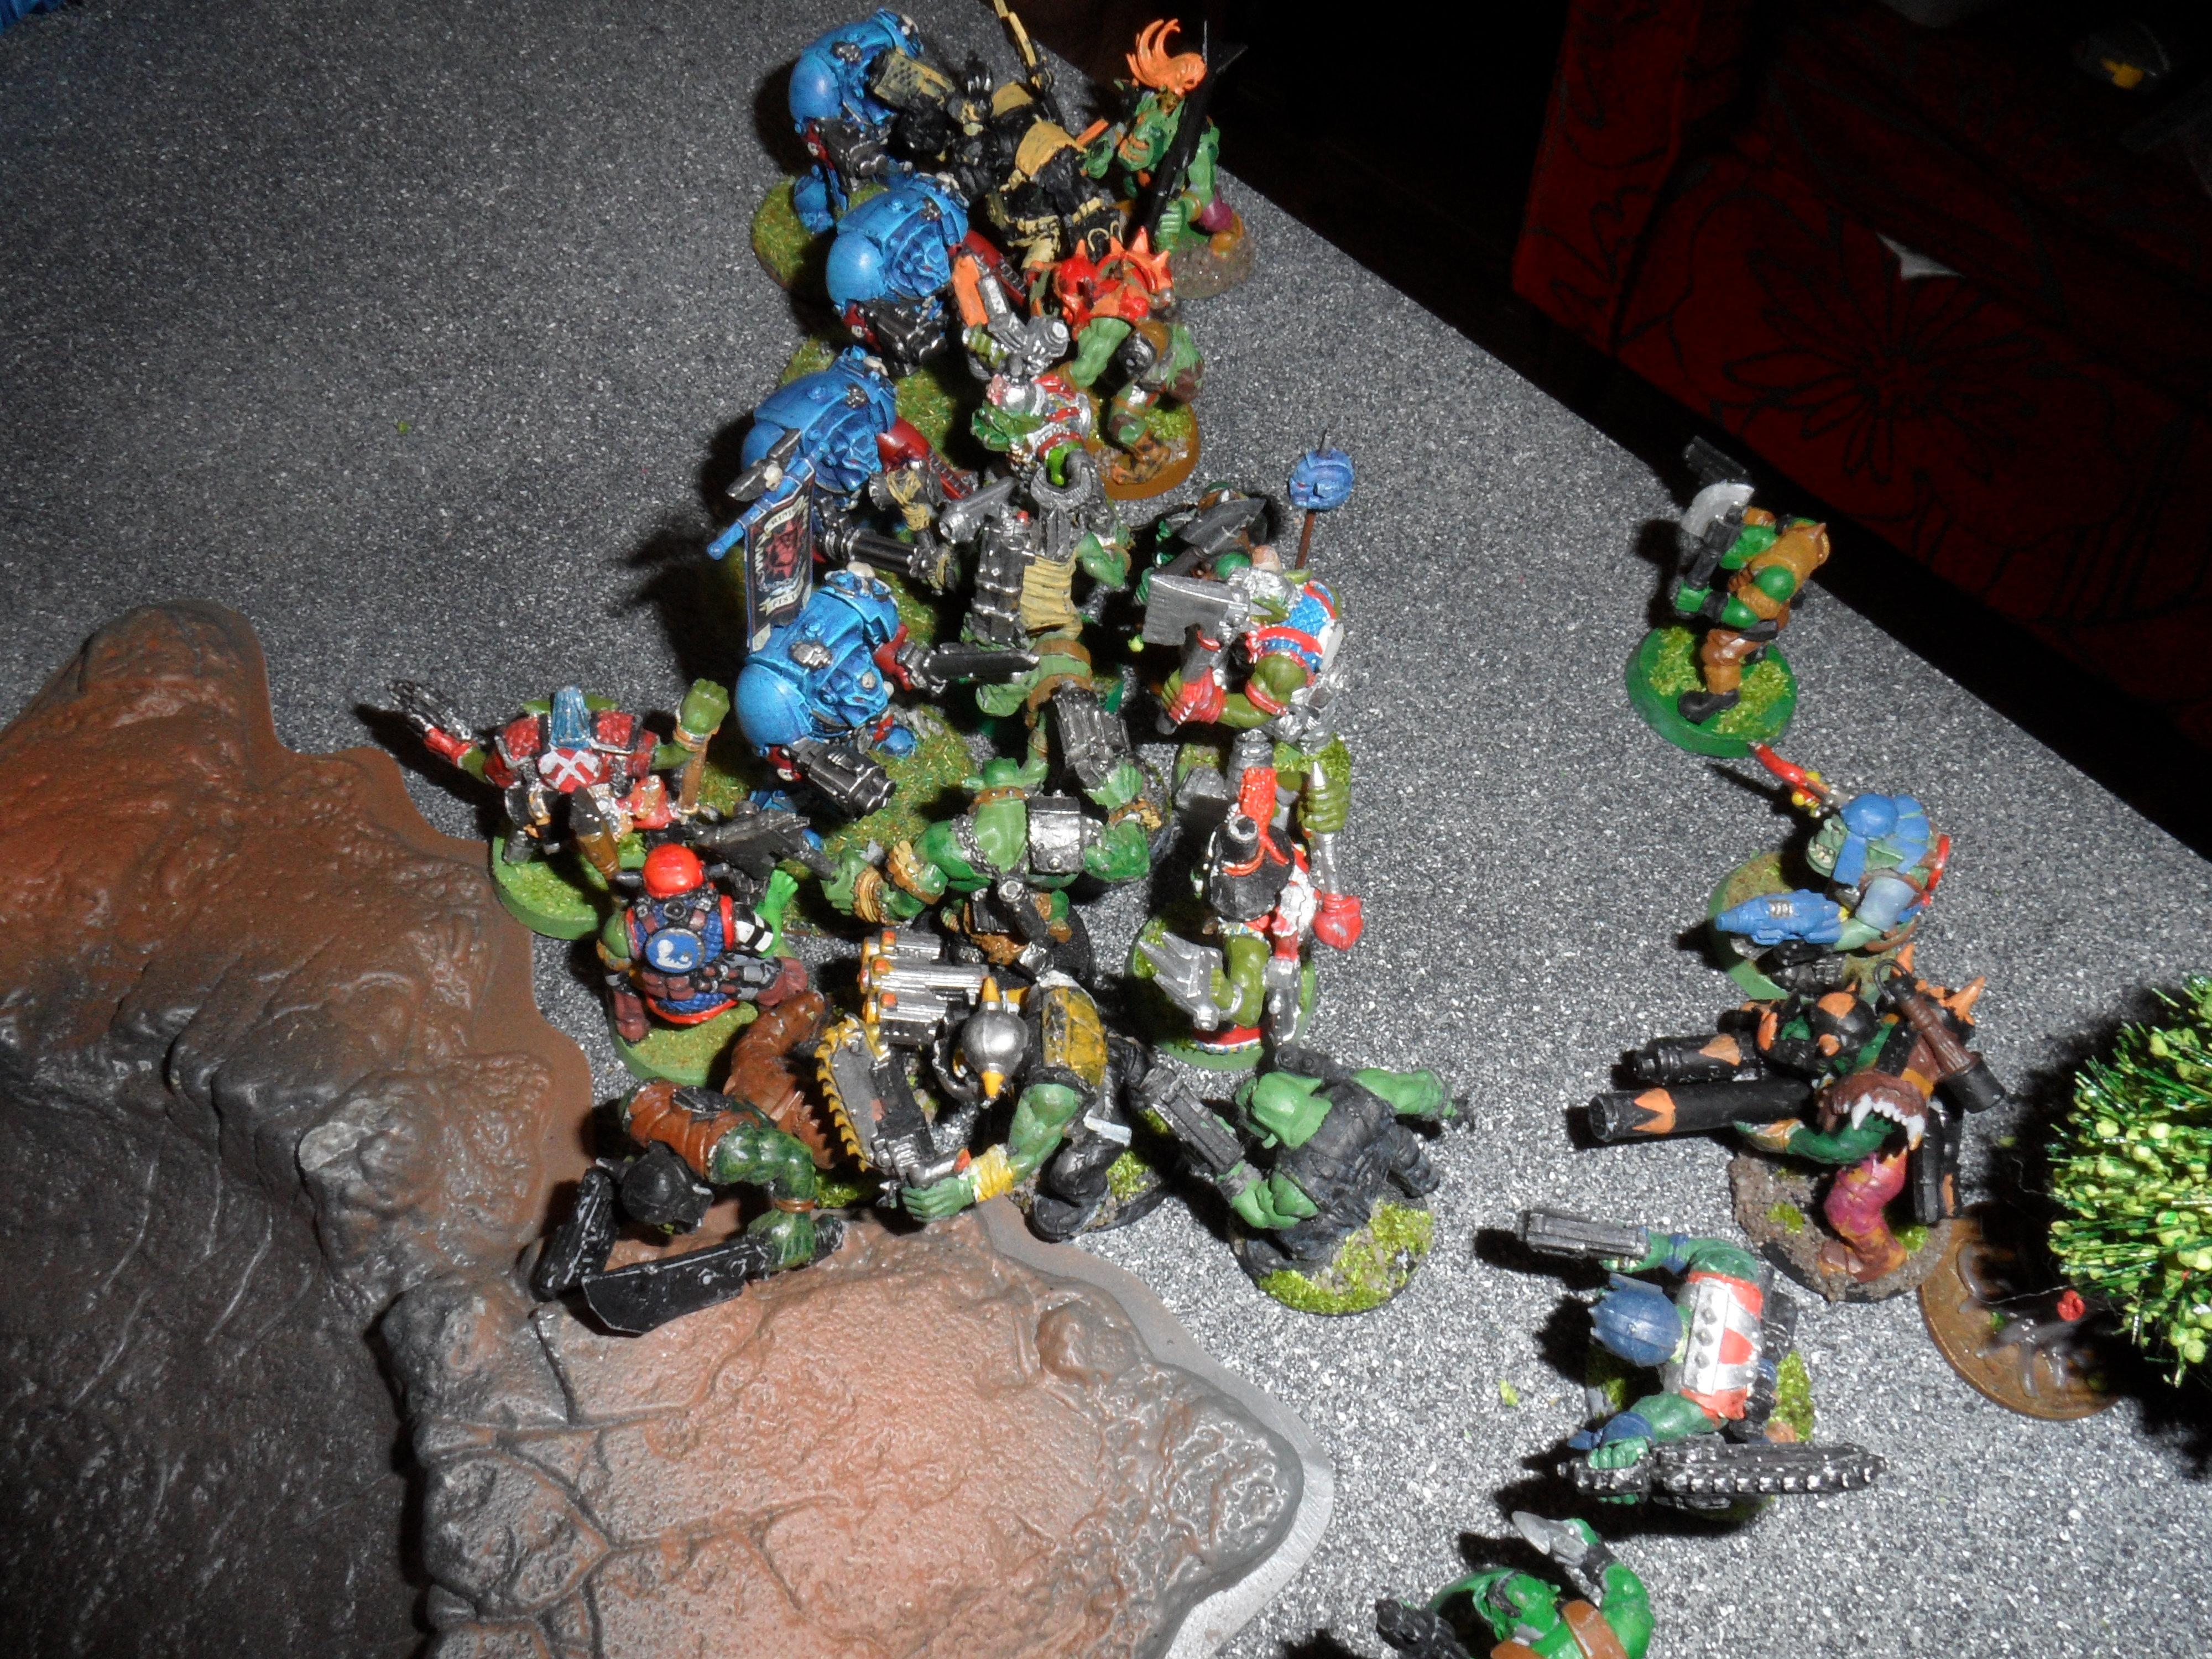 A hail of attacks slowly beat down the Terminators